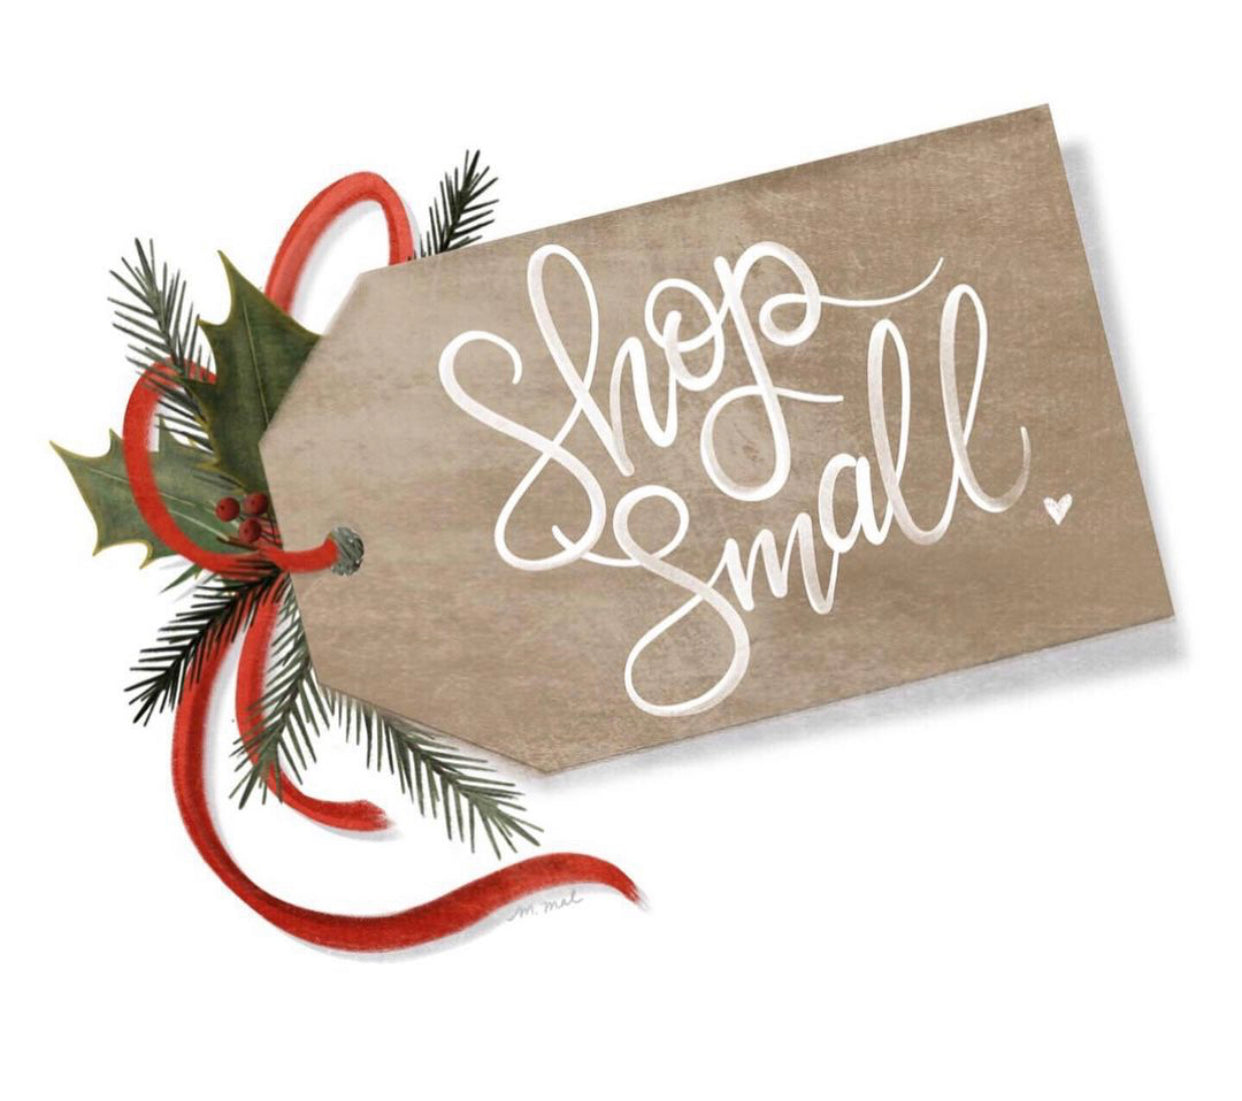 A Holiday Challenge 🎁 I Pledge To Shop Small & Give Back!